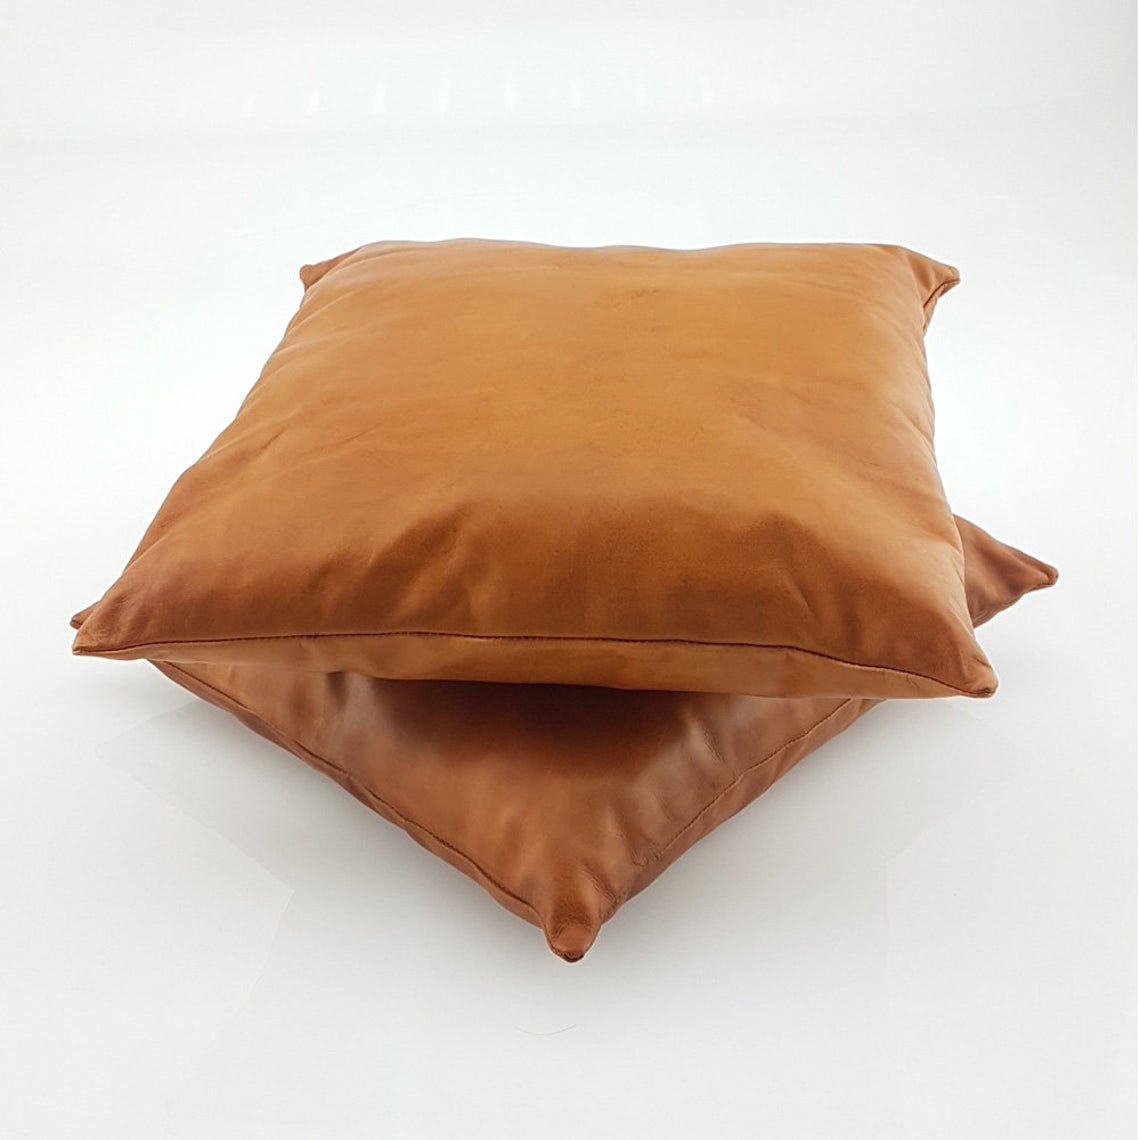 New Handmade Genuine Leather Pillow Cover Tan Decorative For Couch ...